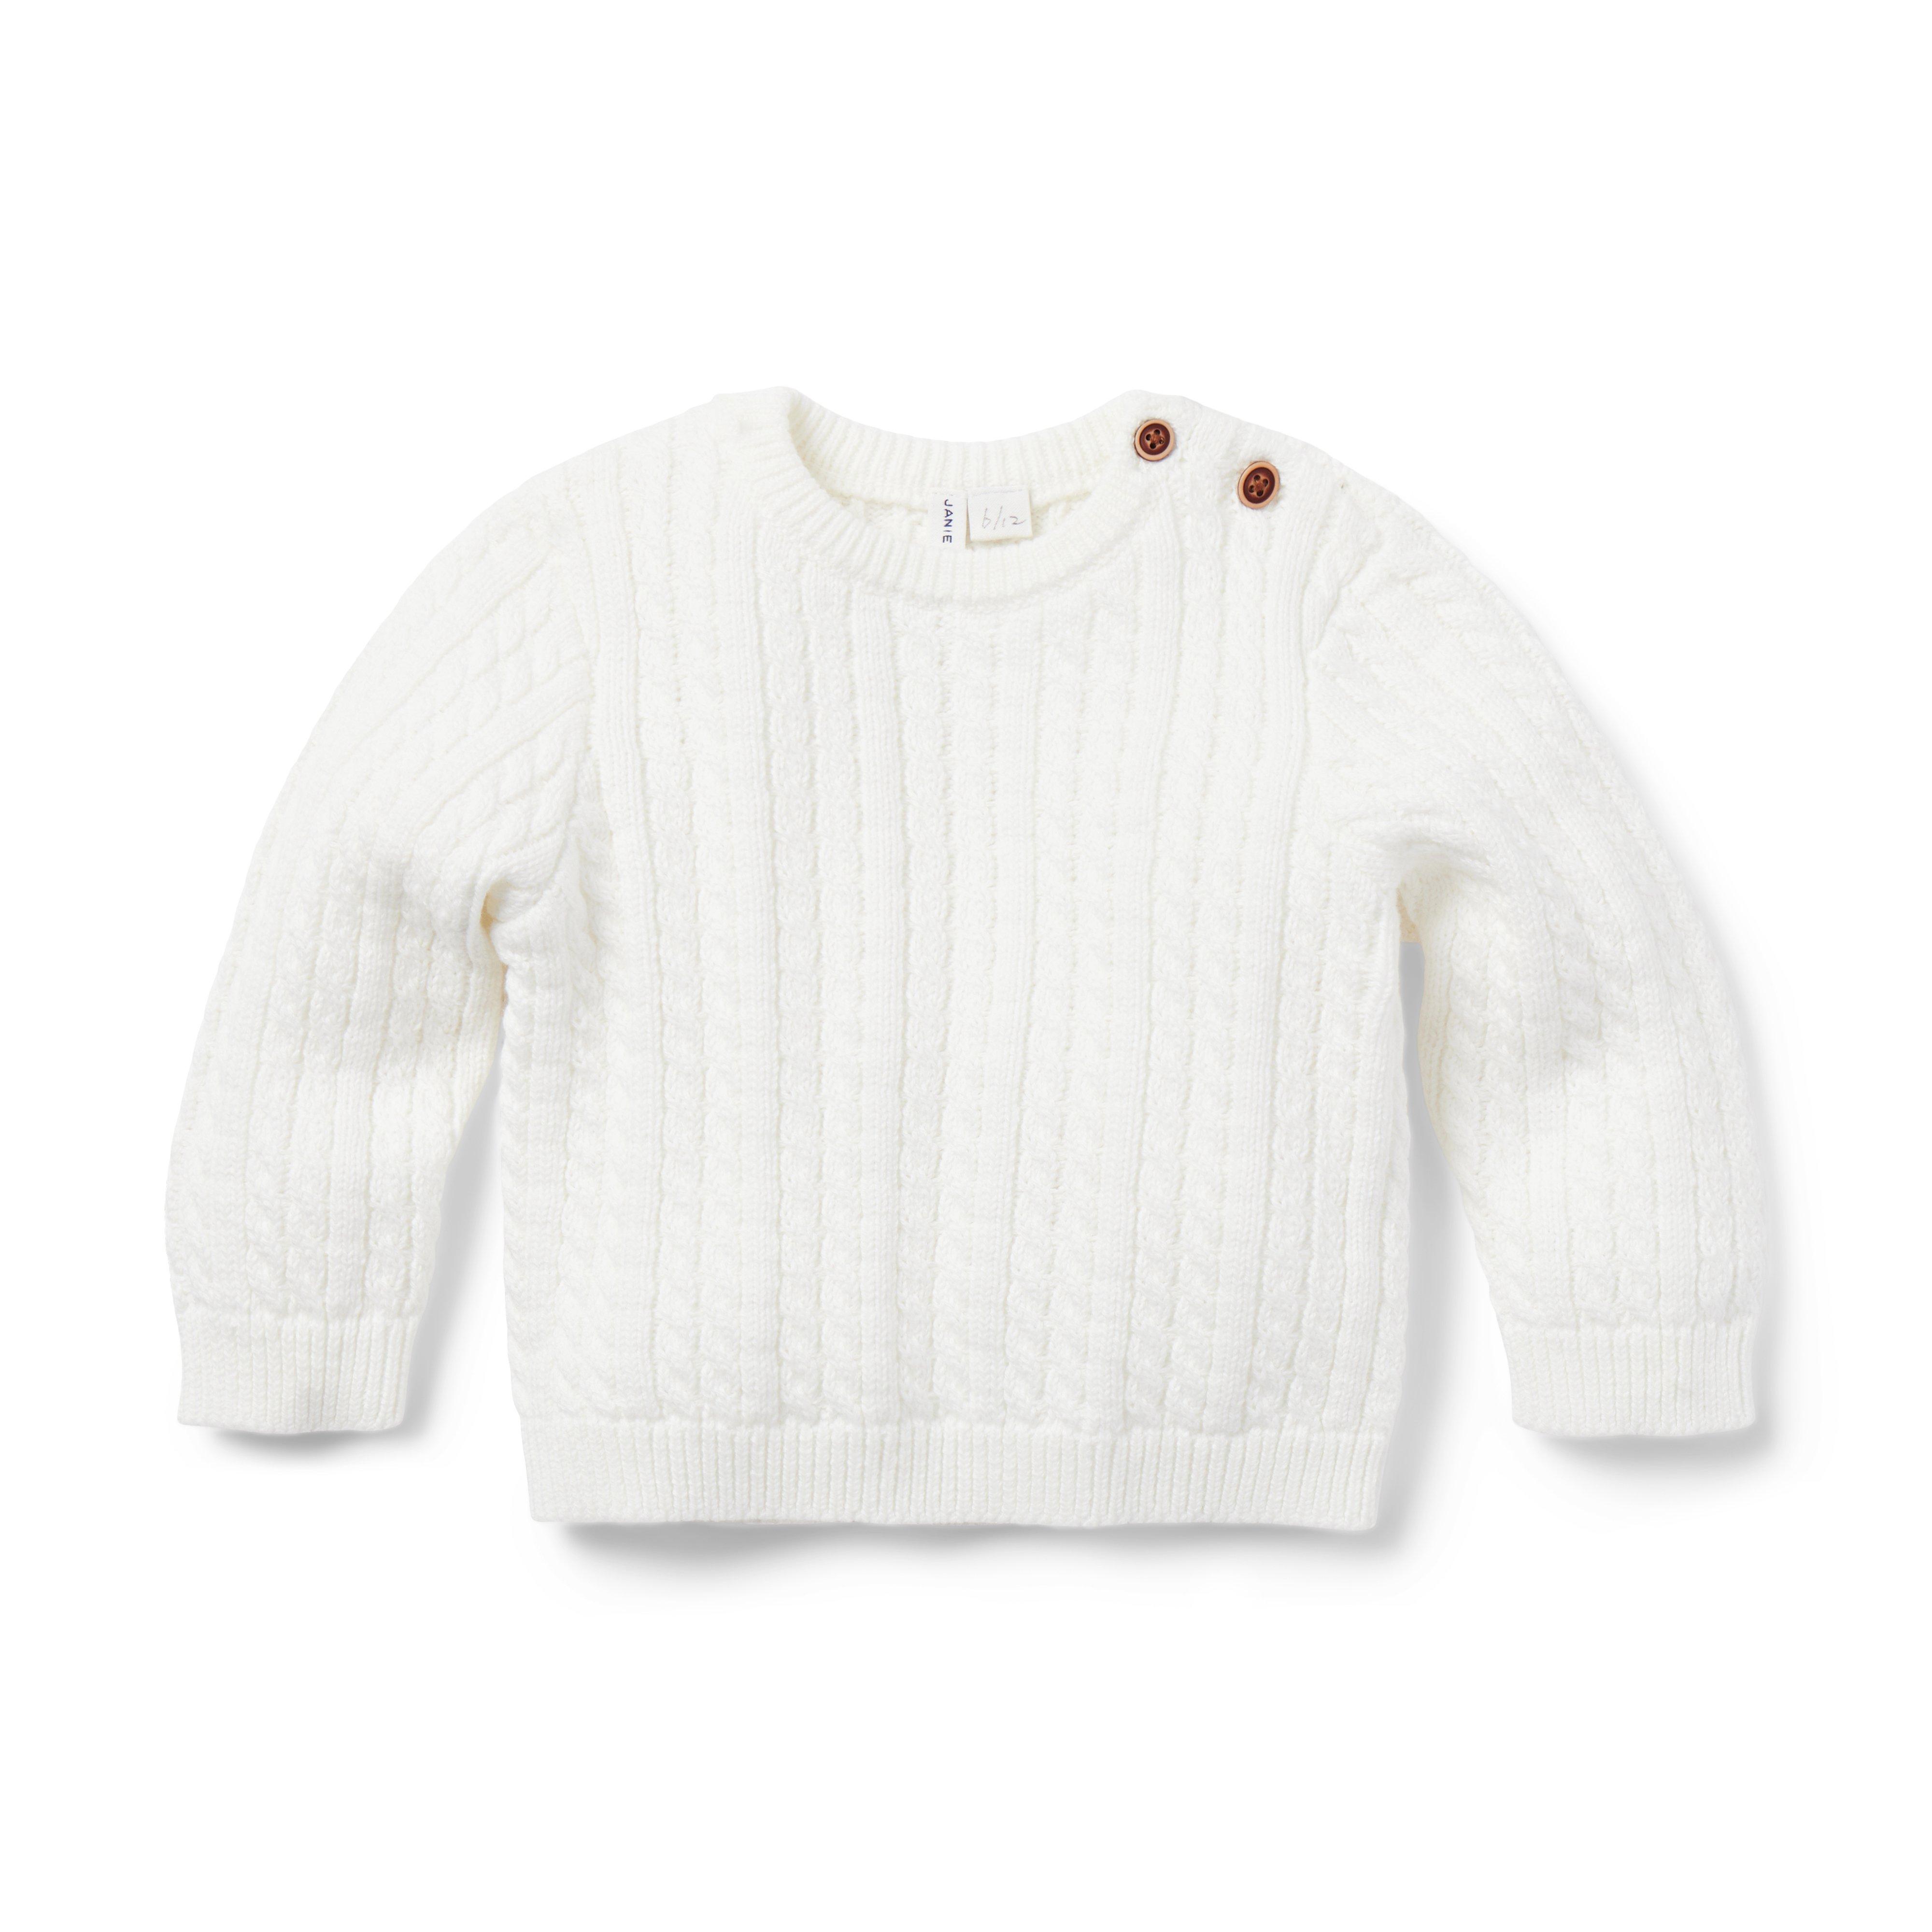 Baby Cable Knit Sweater